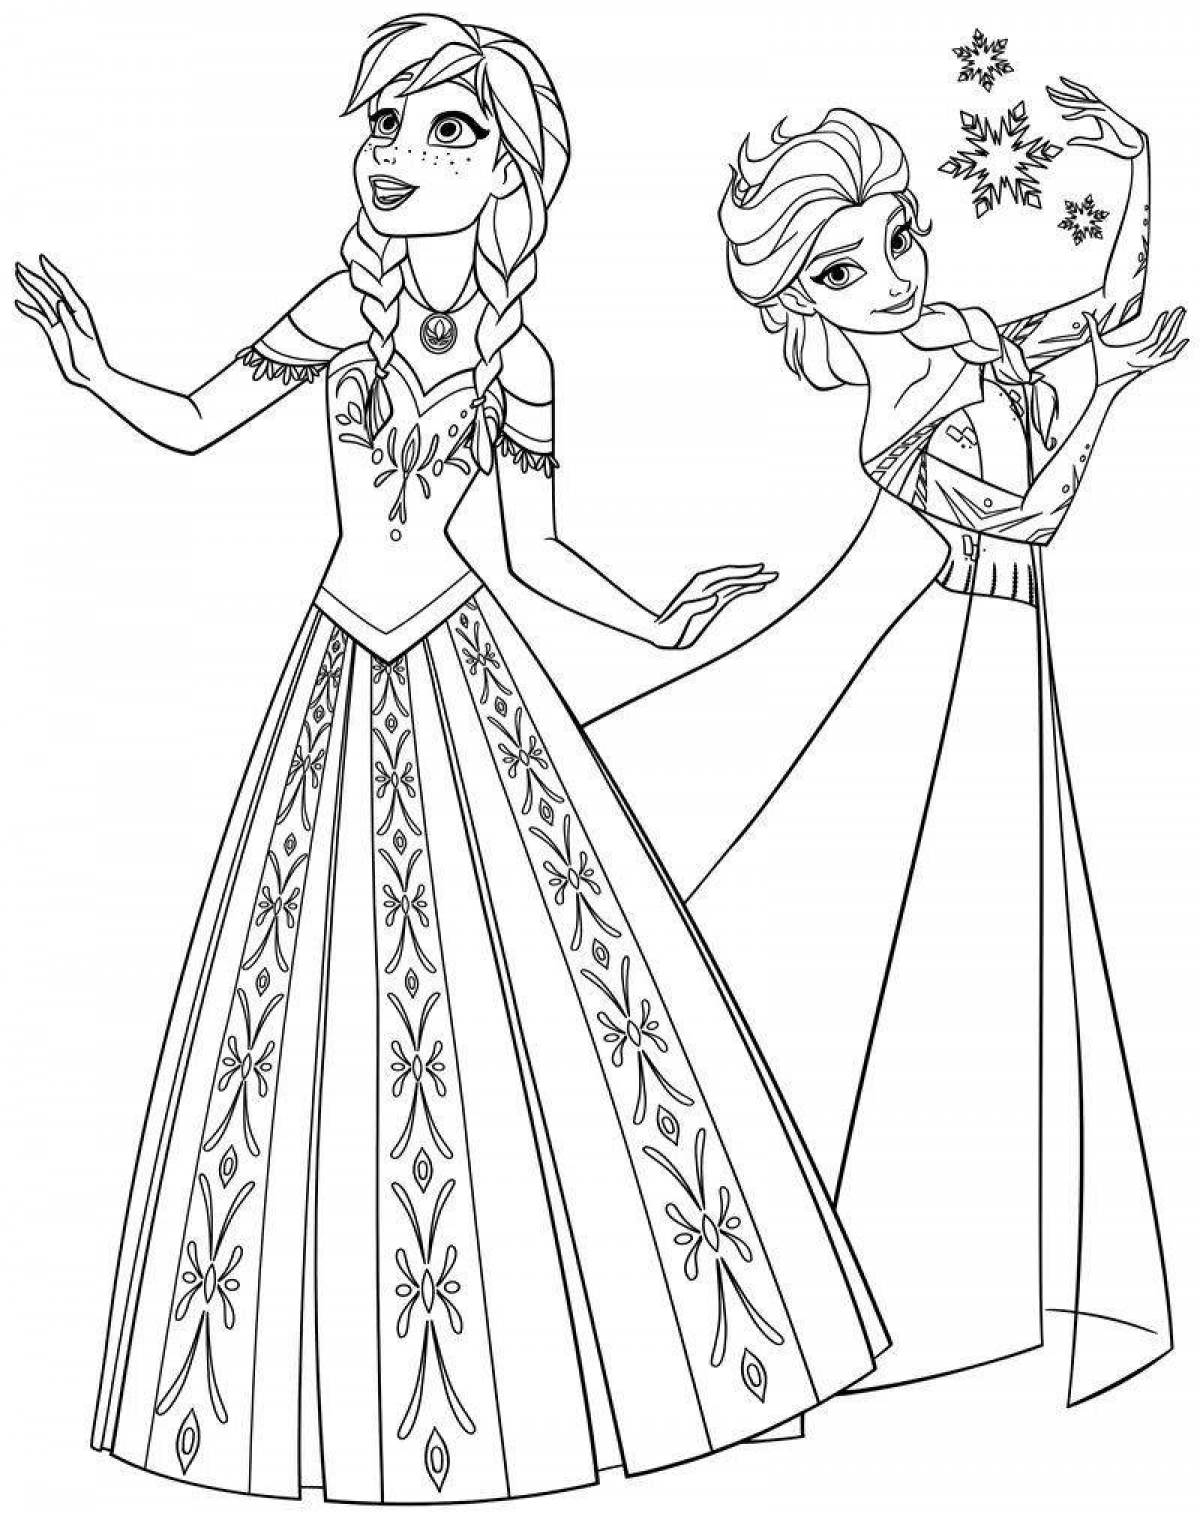 Fabulous Elsa coloring book for 5-6 year olds